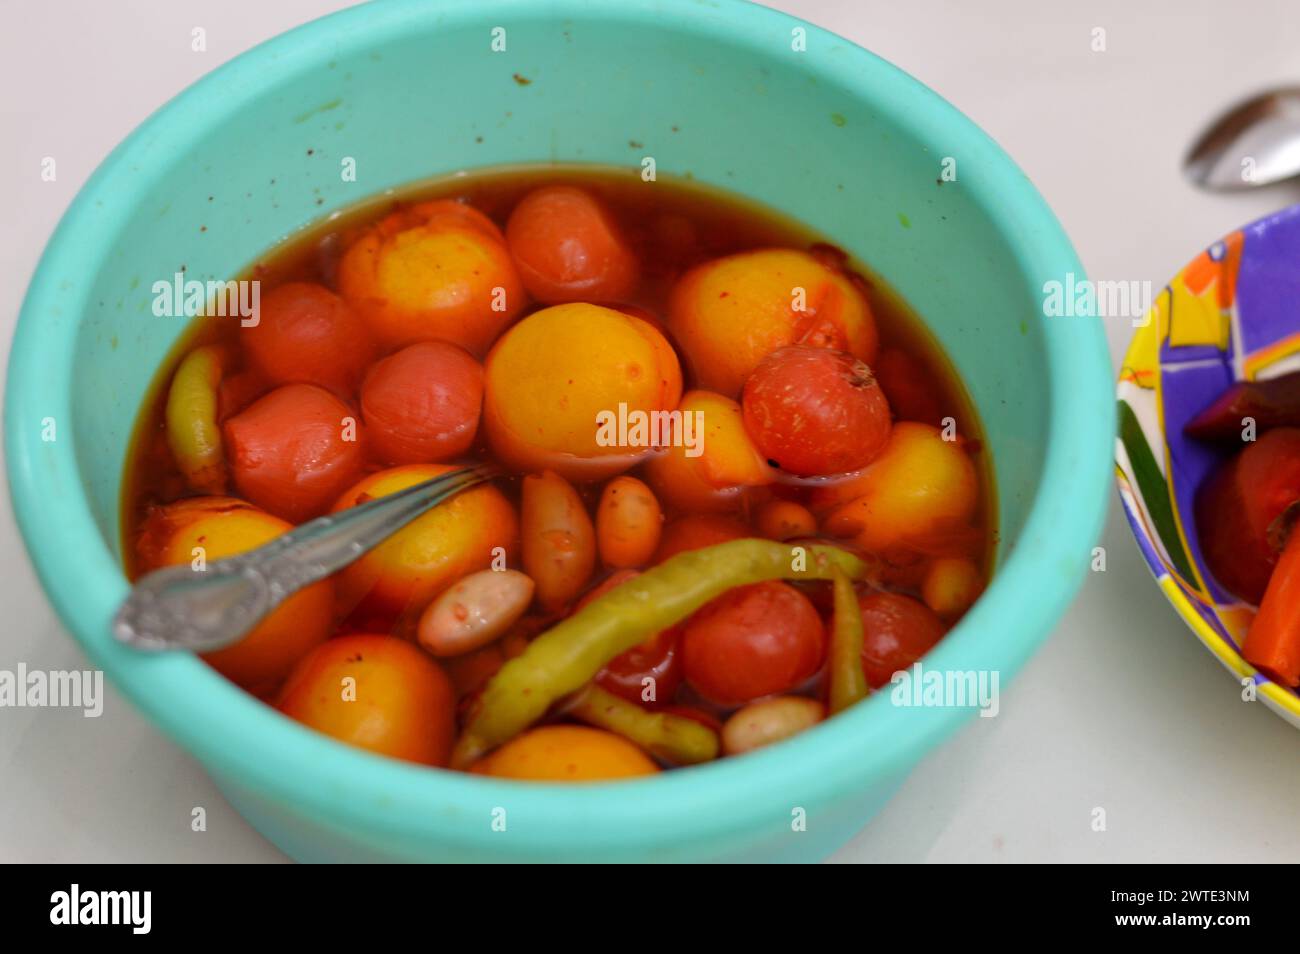 bowl of marinated vegetables (Torshi) or mixed pickled vegetables of lemon, onions, red peppers and salt, Egyptian appetizer Arabian cuisine, selectiv Stock Photo